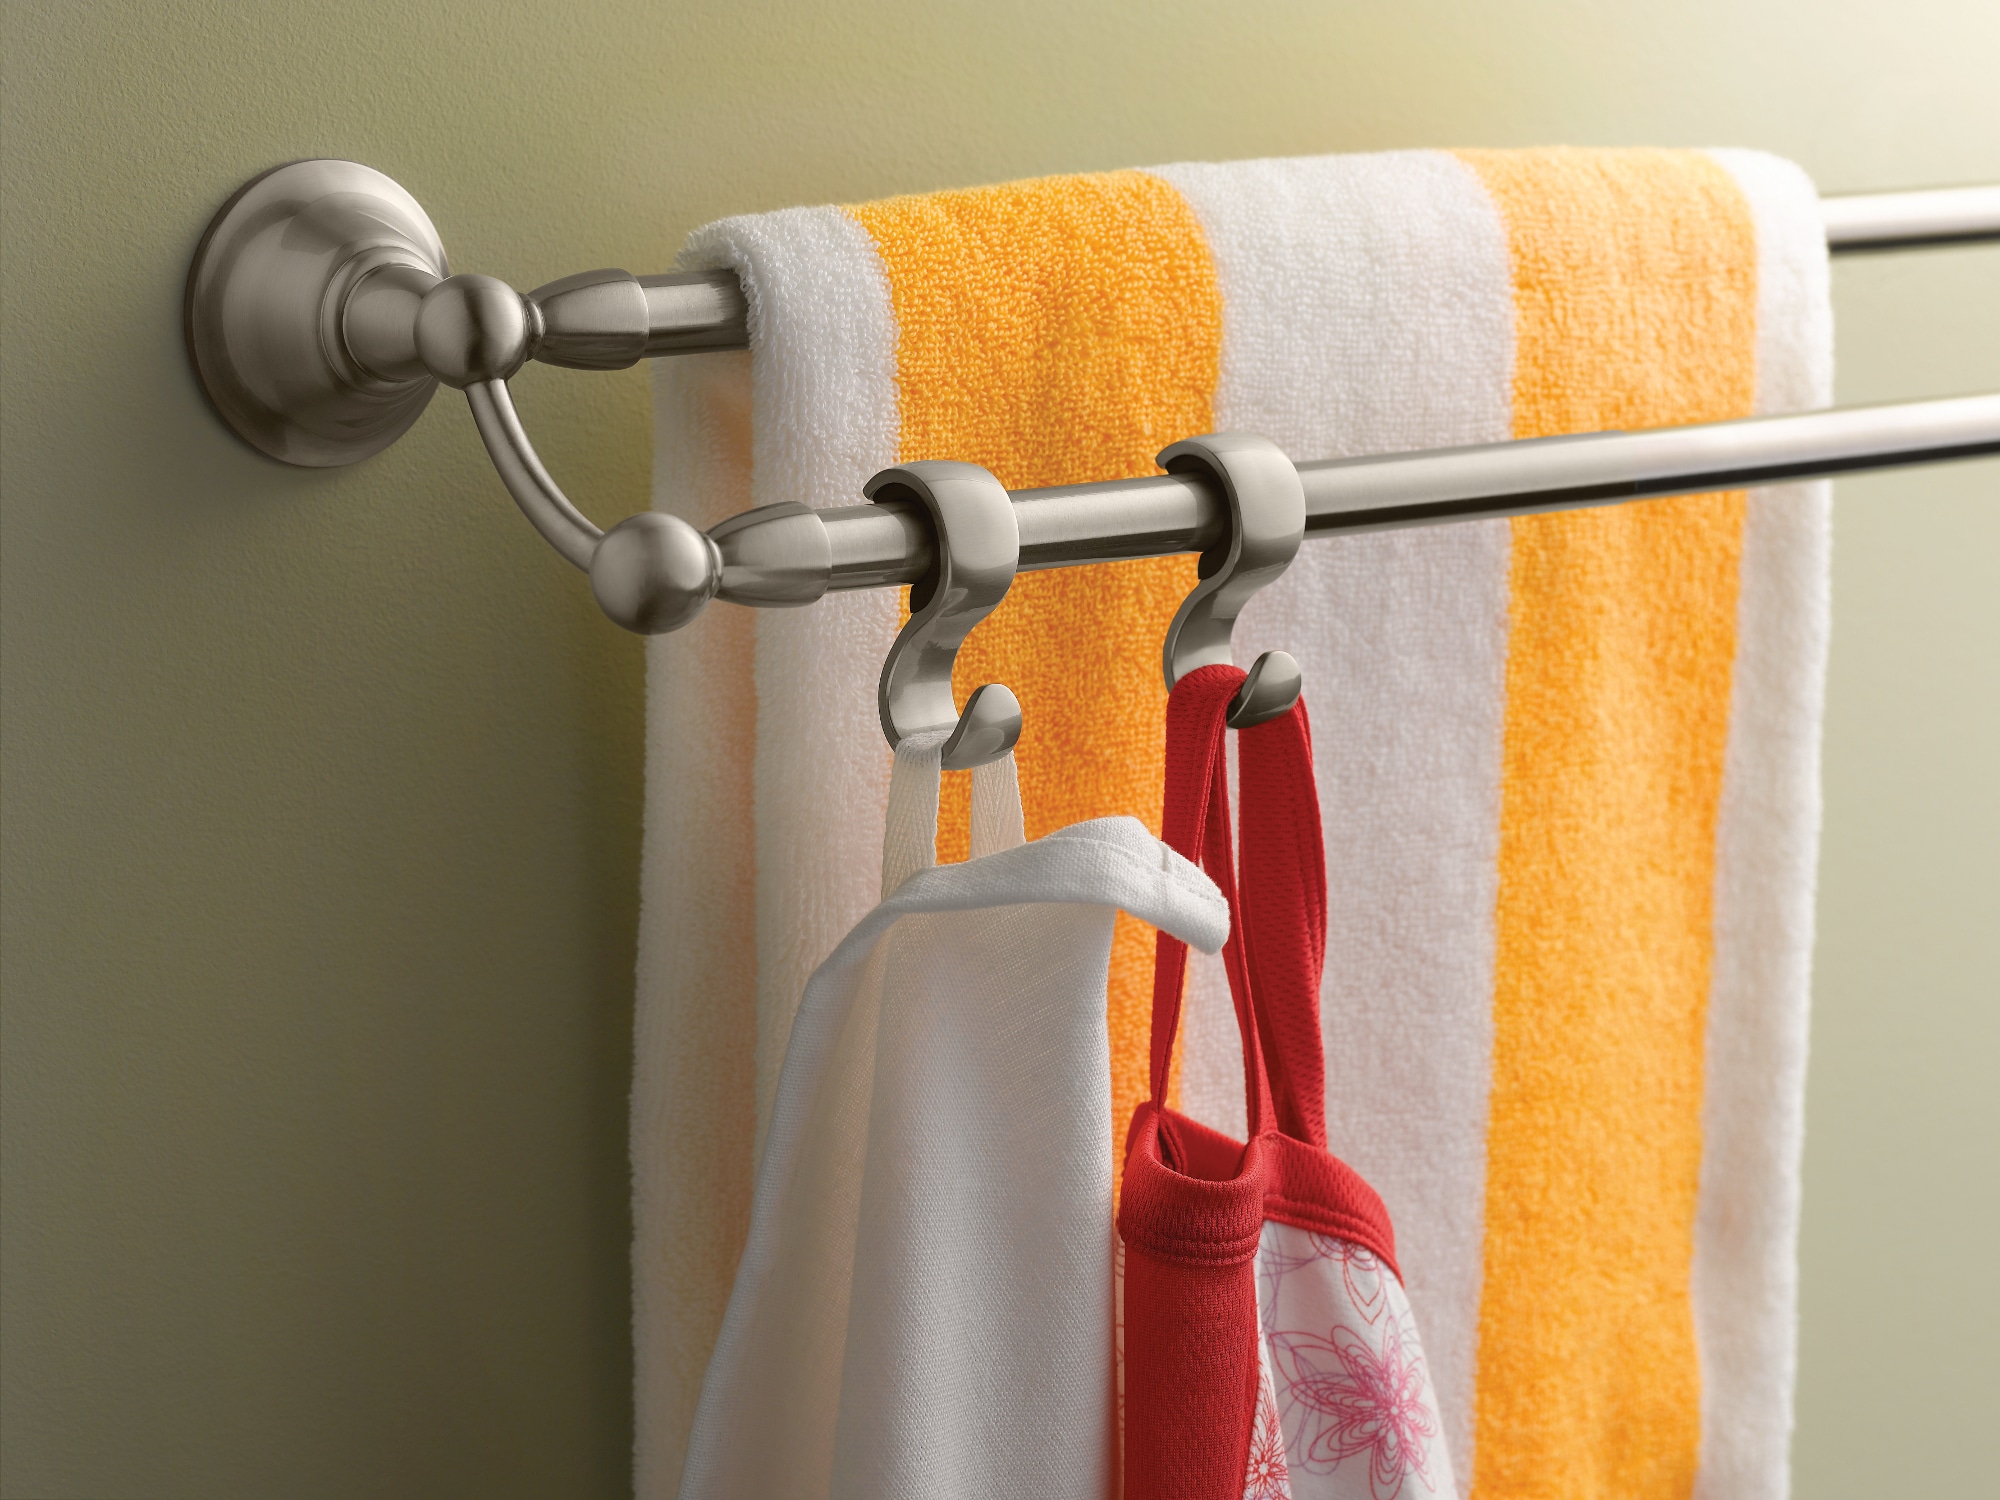 Norpro Stainless Steel Towel Holder With Suction Base 7497